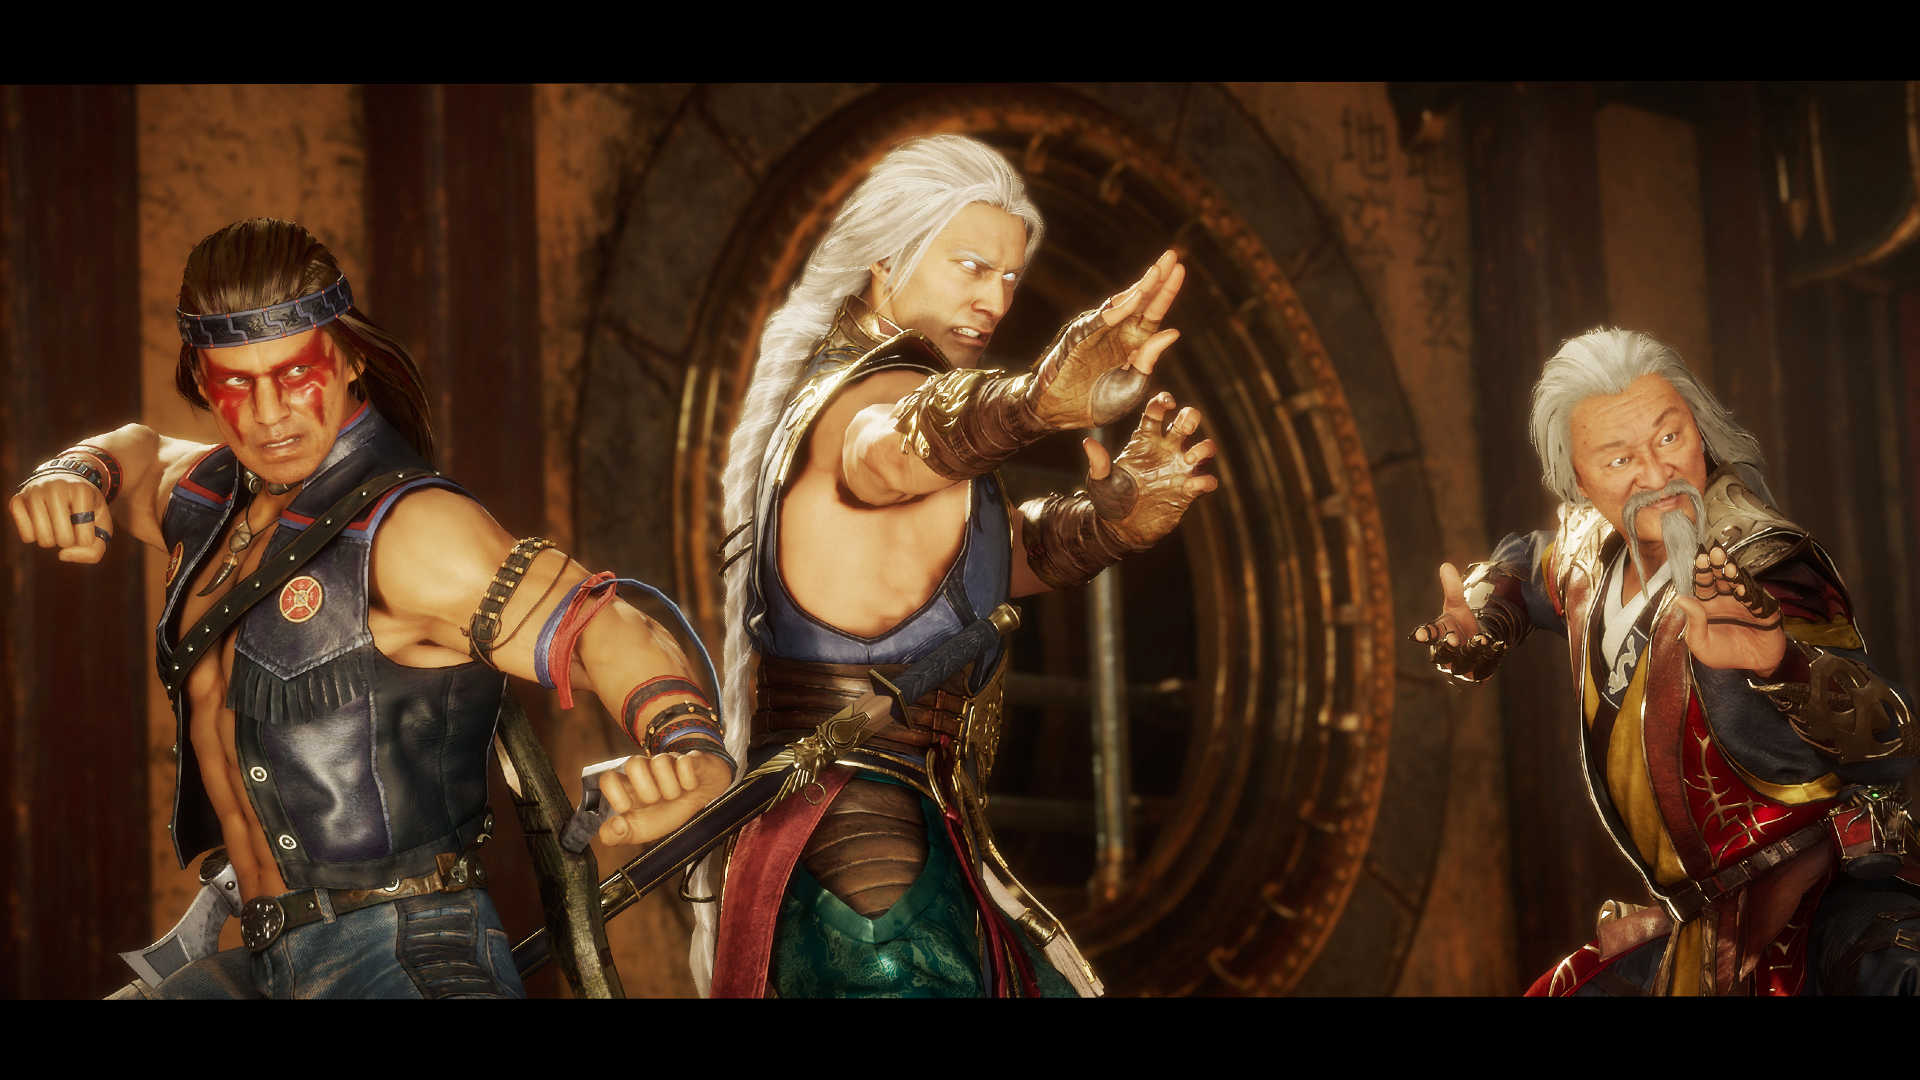 How to Perform New 'Mortal Kombat 11: Aftermath' Stage Fatalities